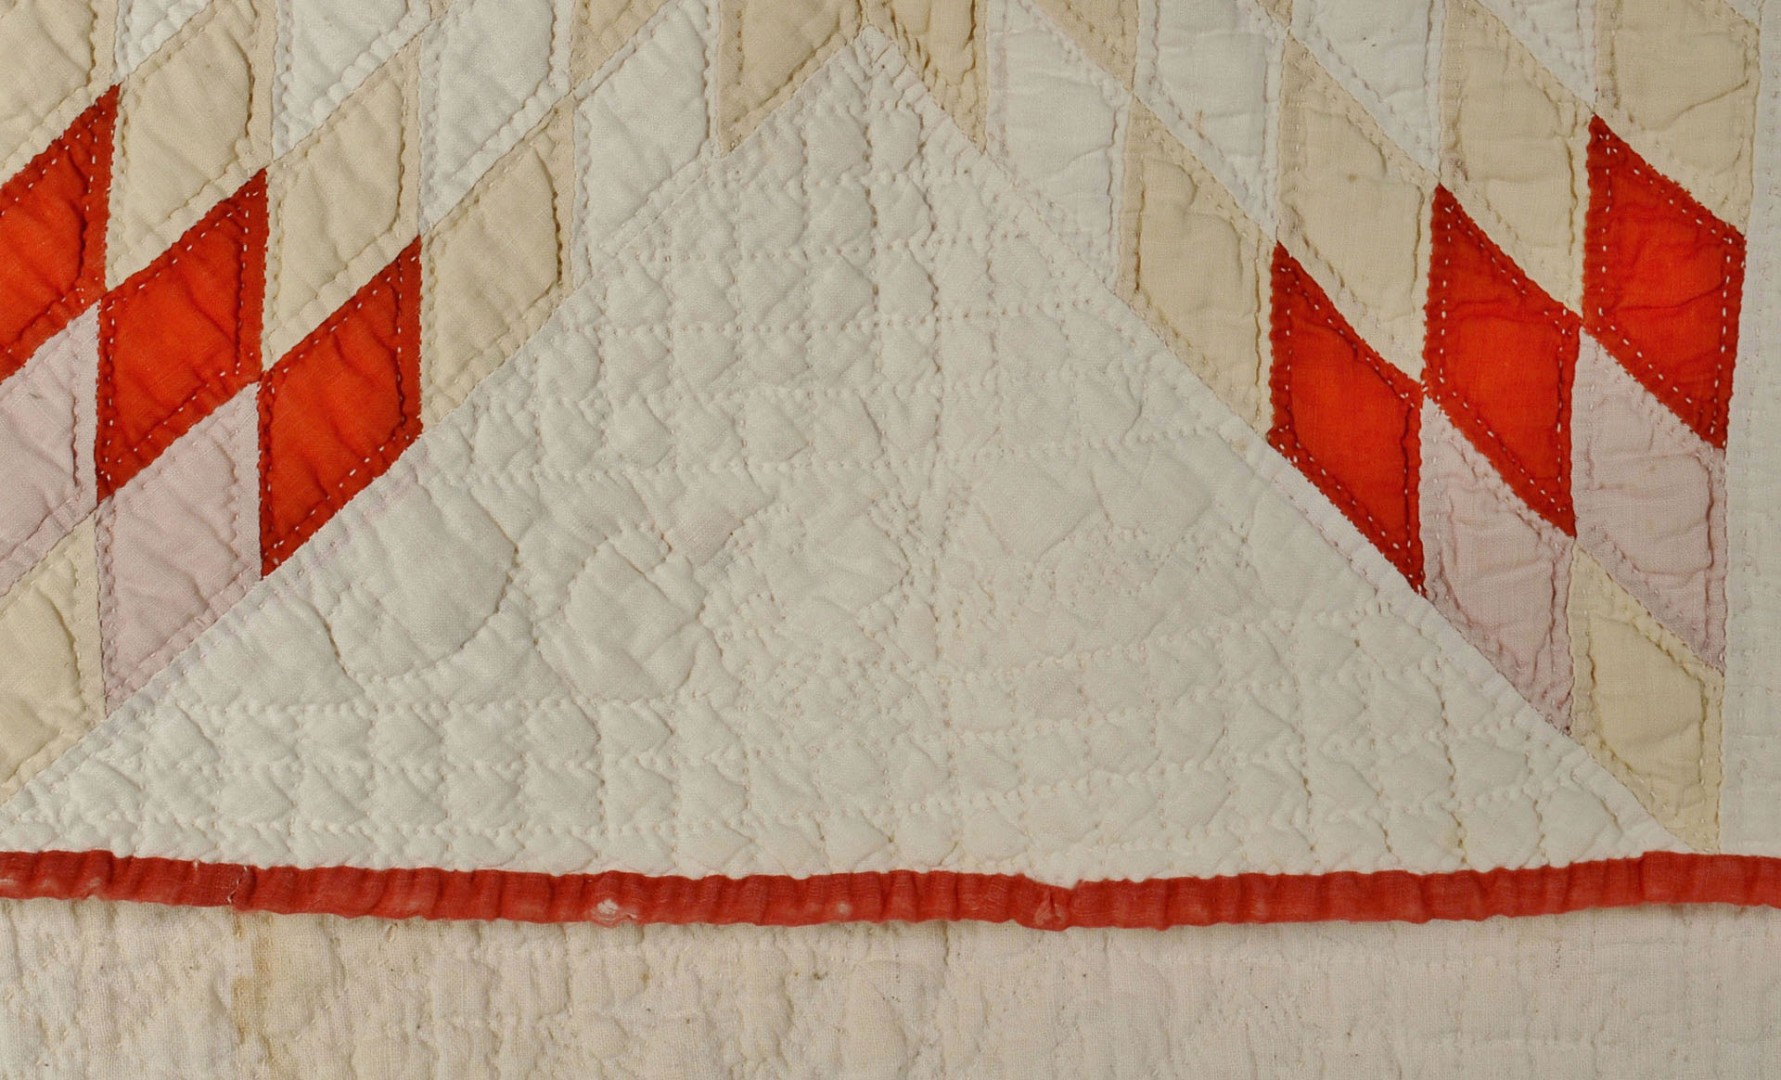 Lot 182: Signed Blount Co., TN Quilt, dated 1880